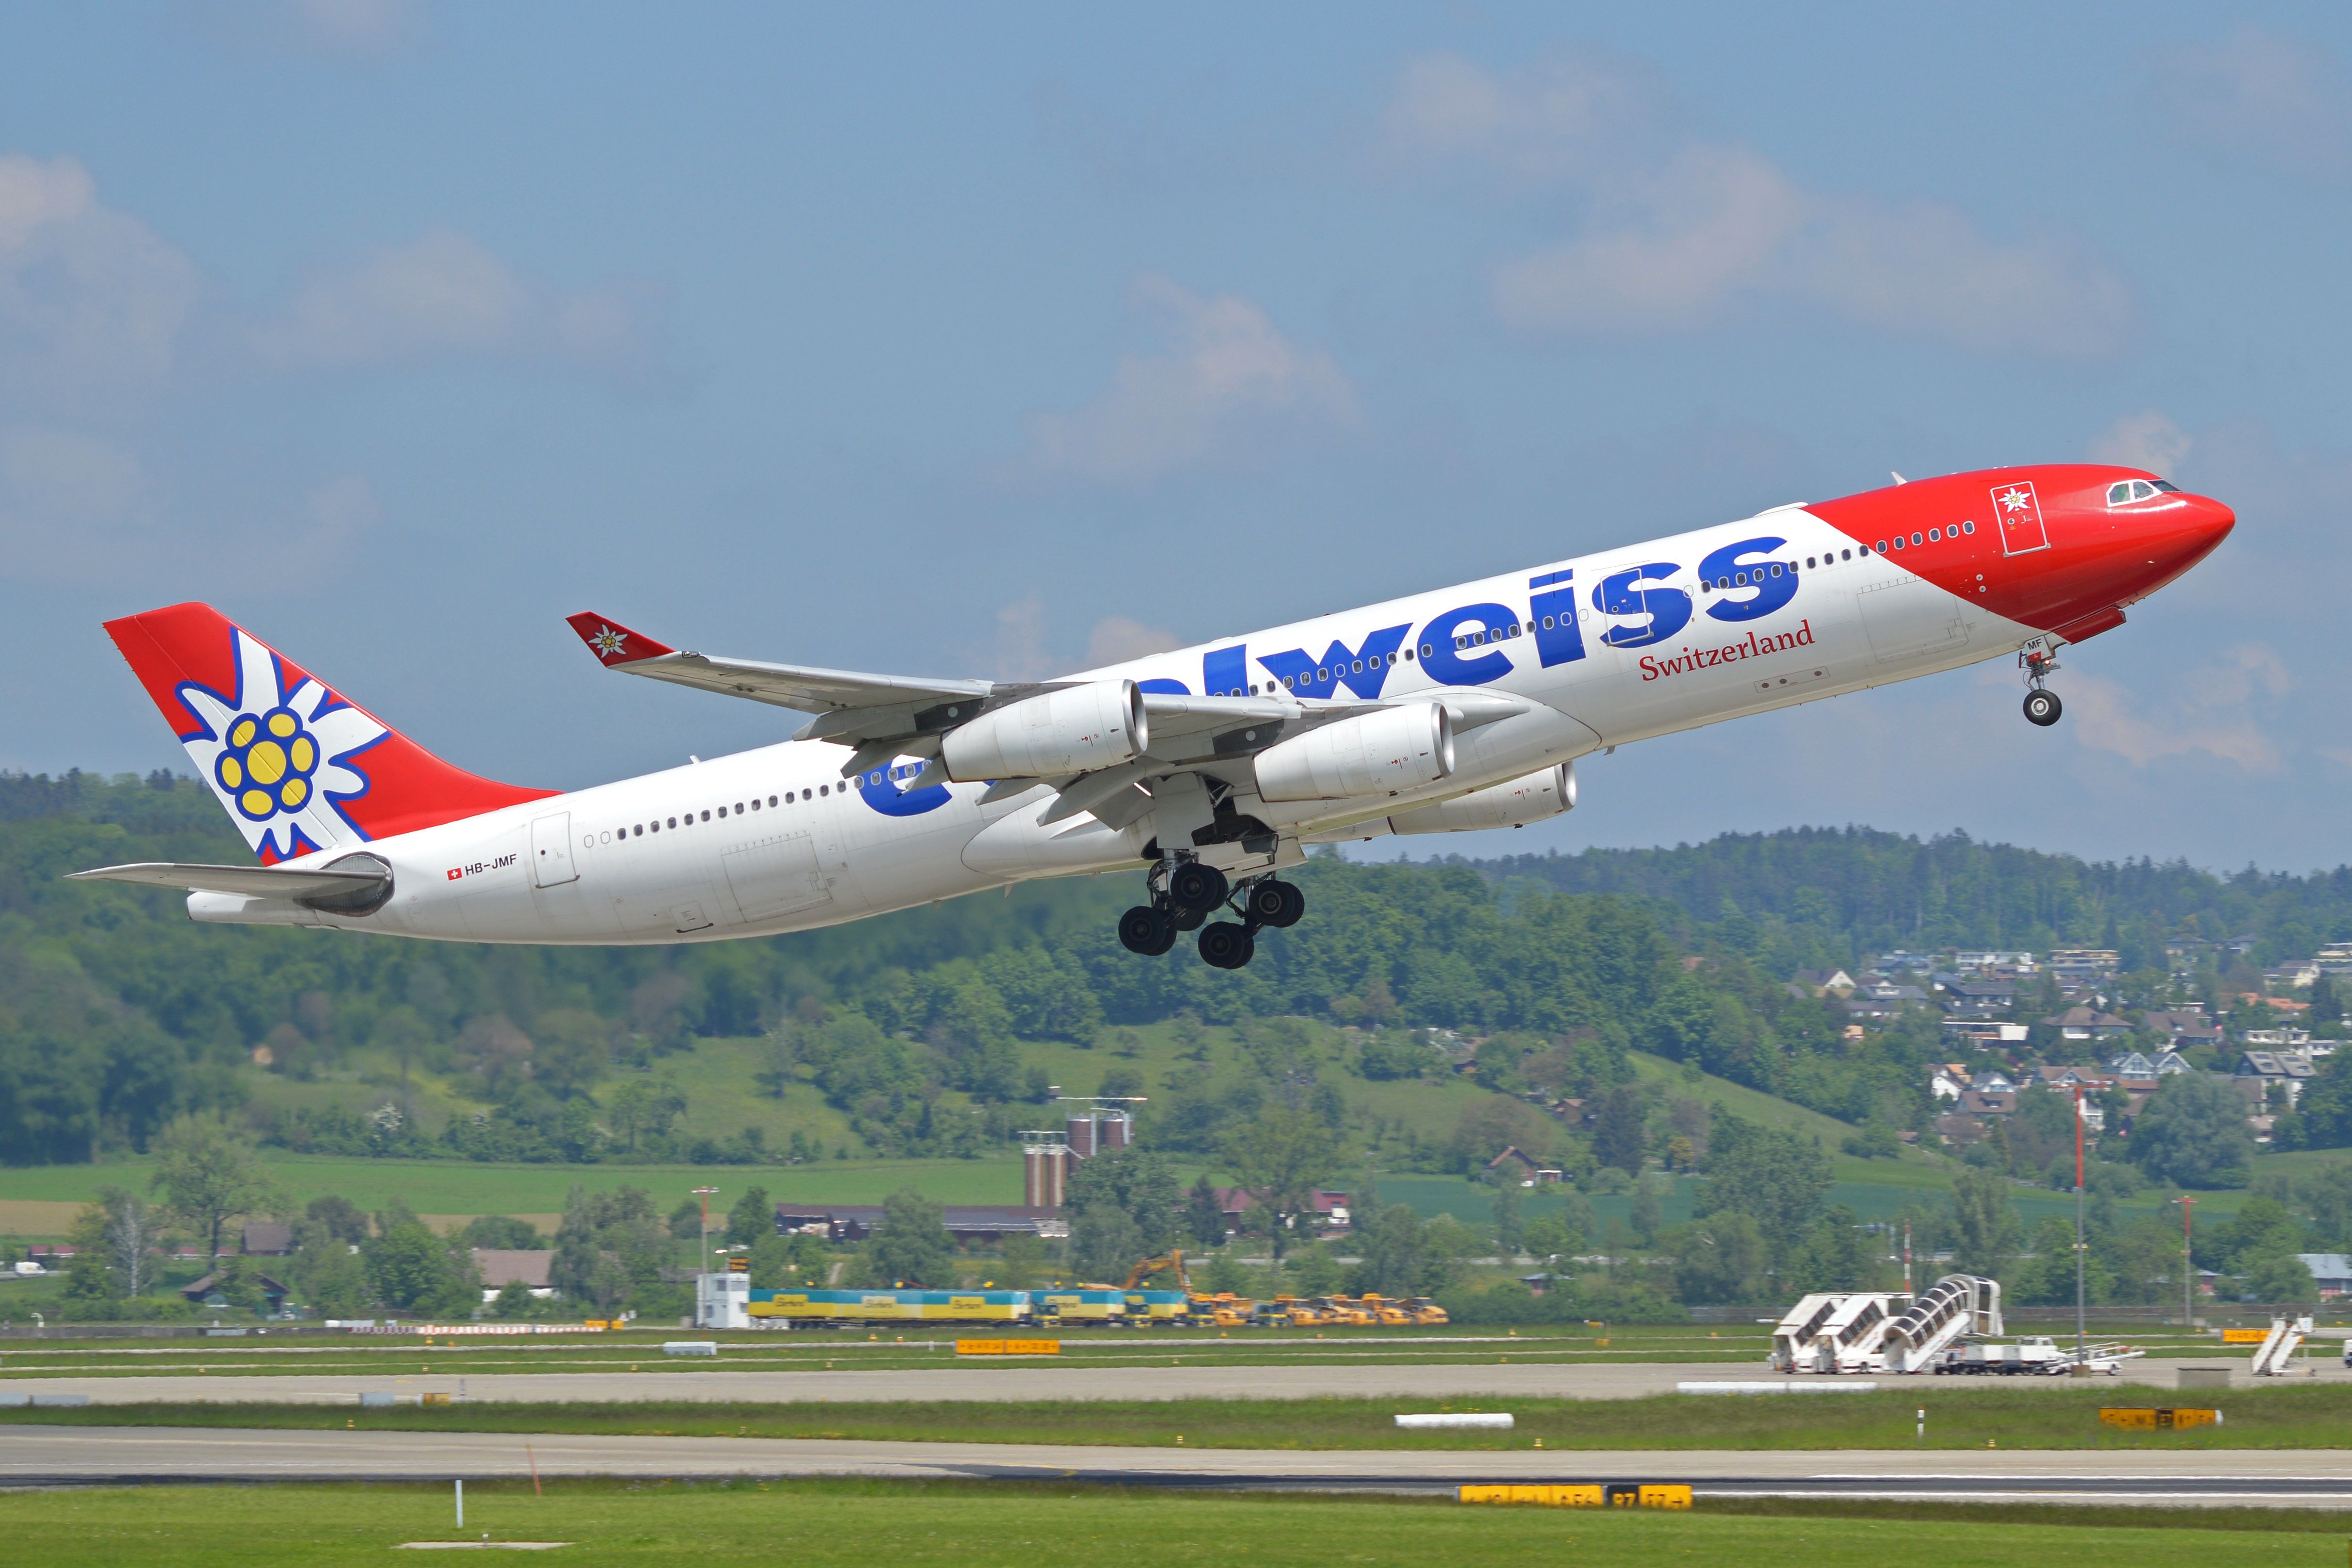 Edelweiss A340-300 take off